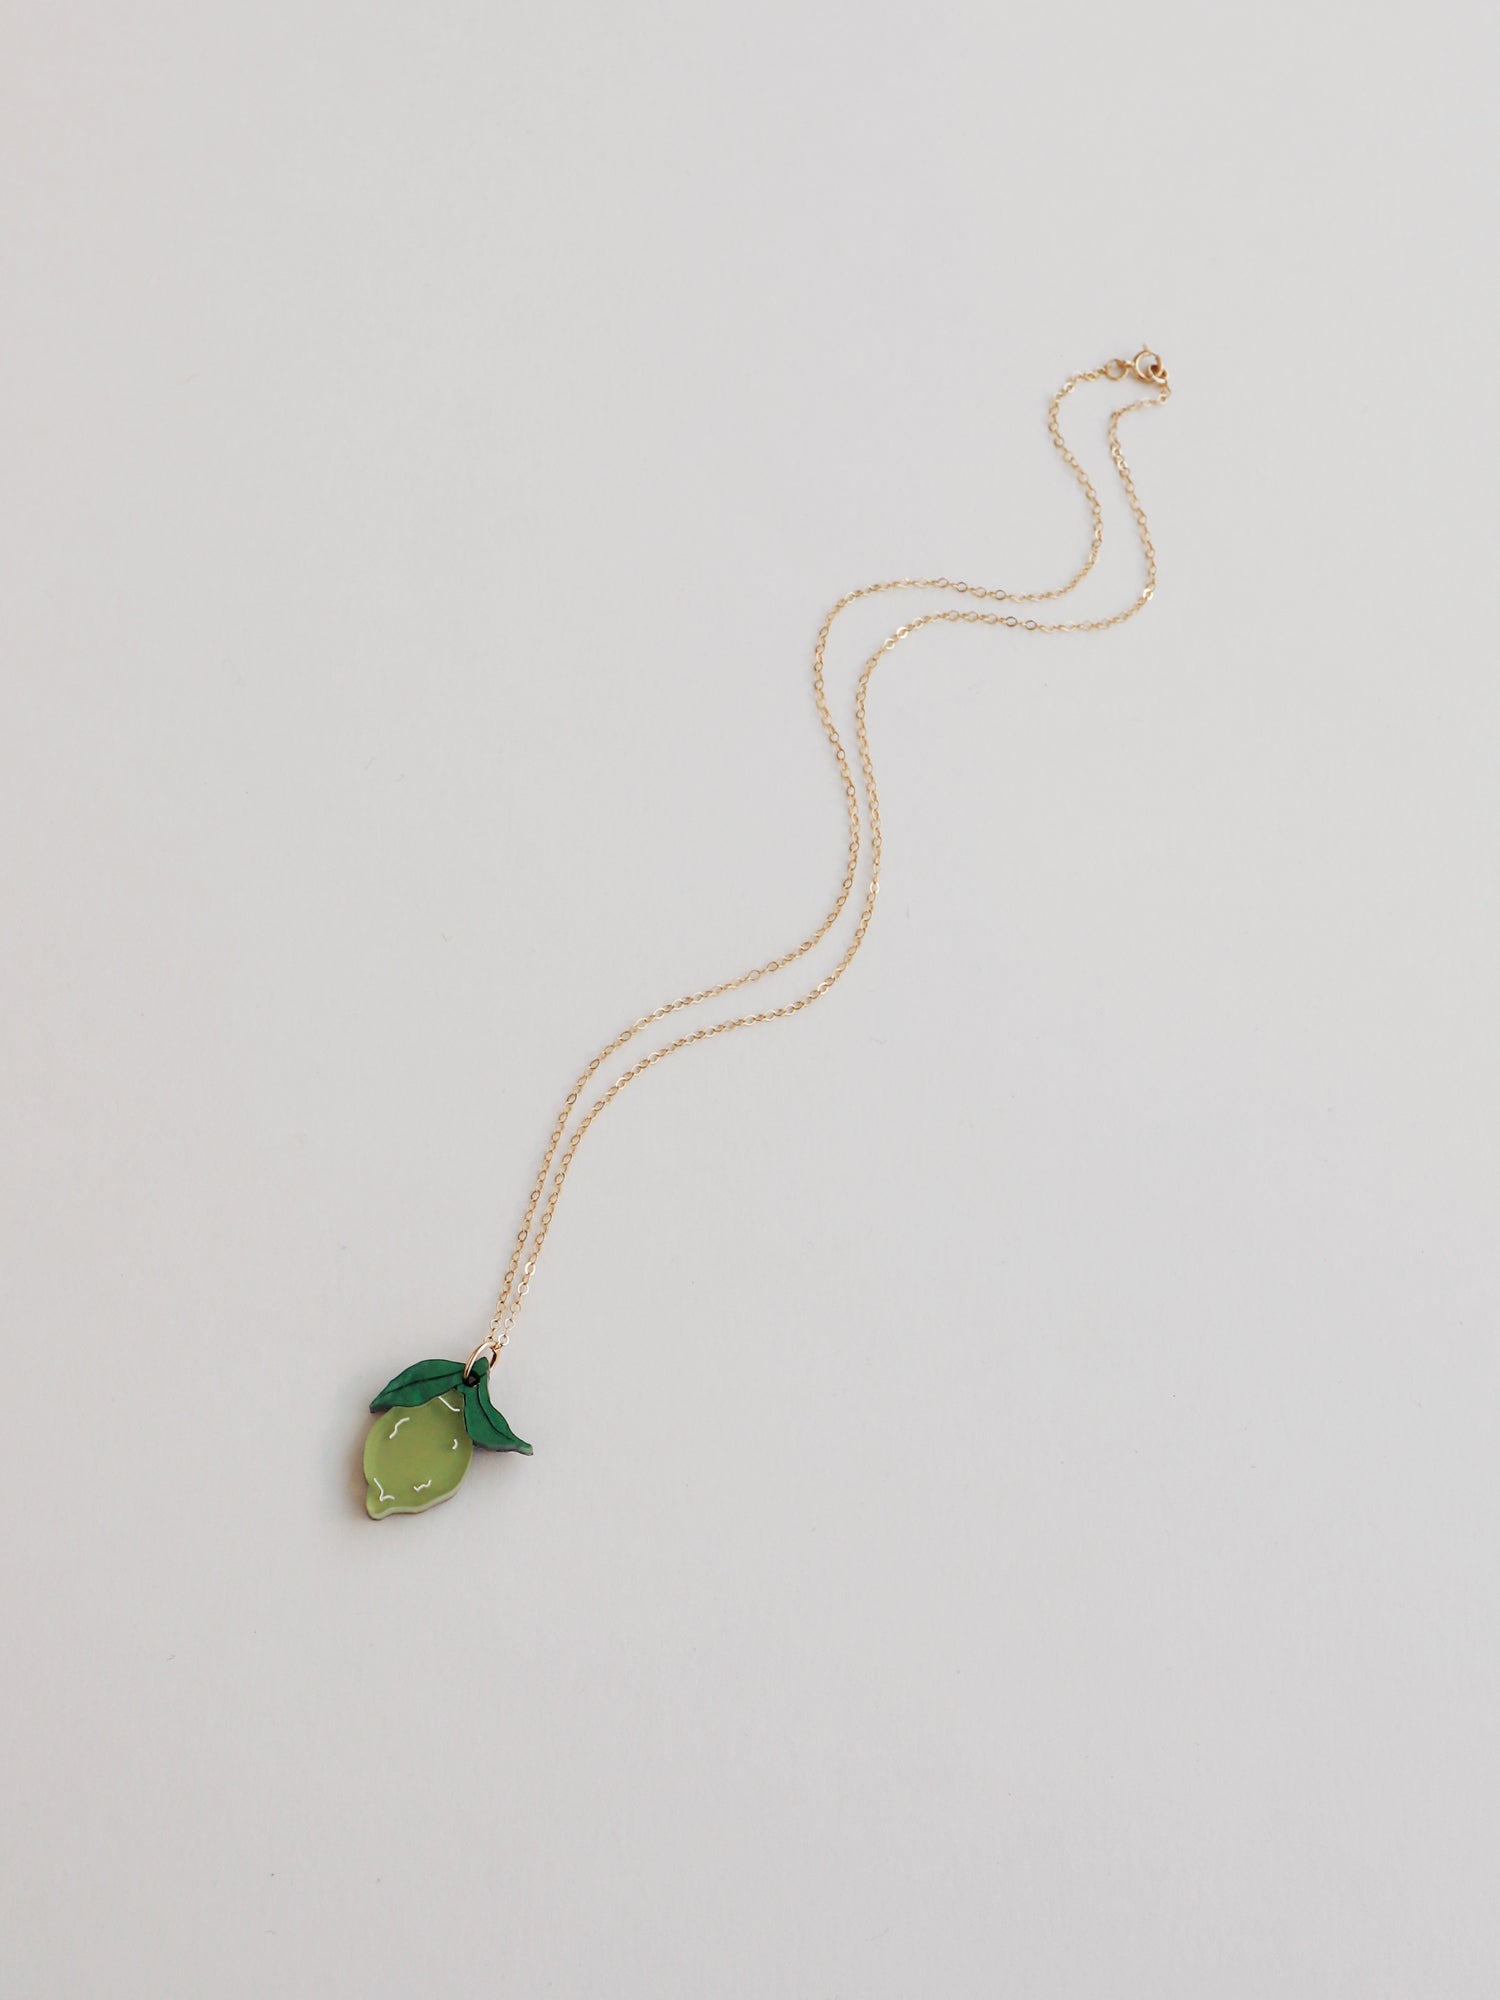 Lime pendant necklace with green leaf made with wood, 64% recycled acrylic and hand-inked details. Hung on a high quality 45cm gold-filled chain. Handmade in the UK by Wolf & Moon.